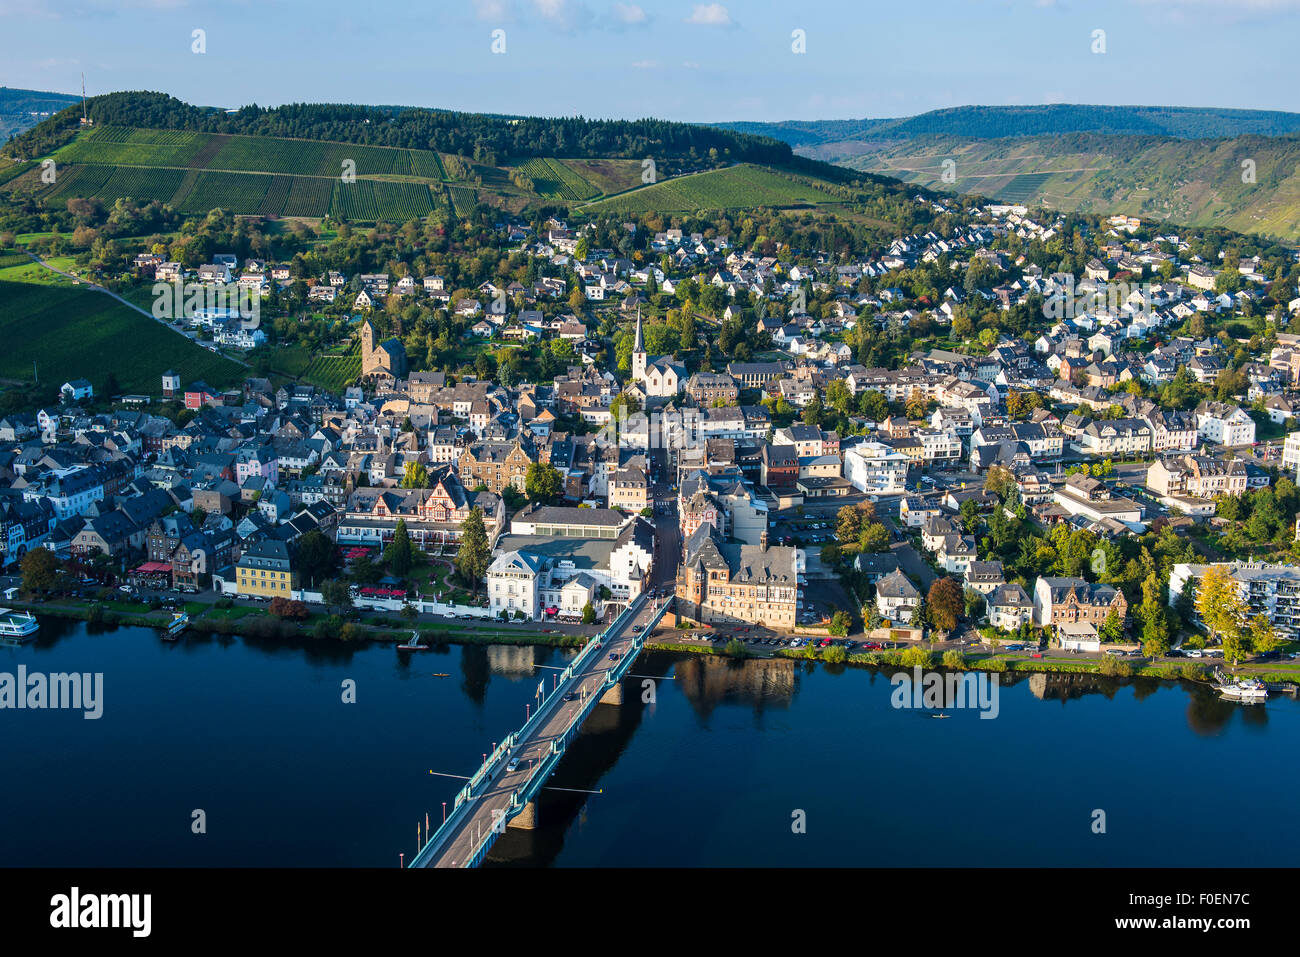 View across Traben-Trarbach and the Moselle river, Moselle valley, Rhineland-Palatinate, Germany Stock Photo